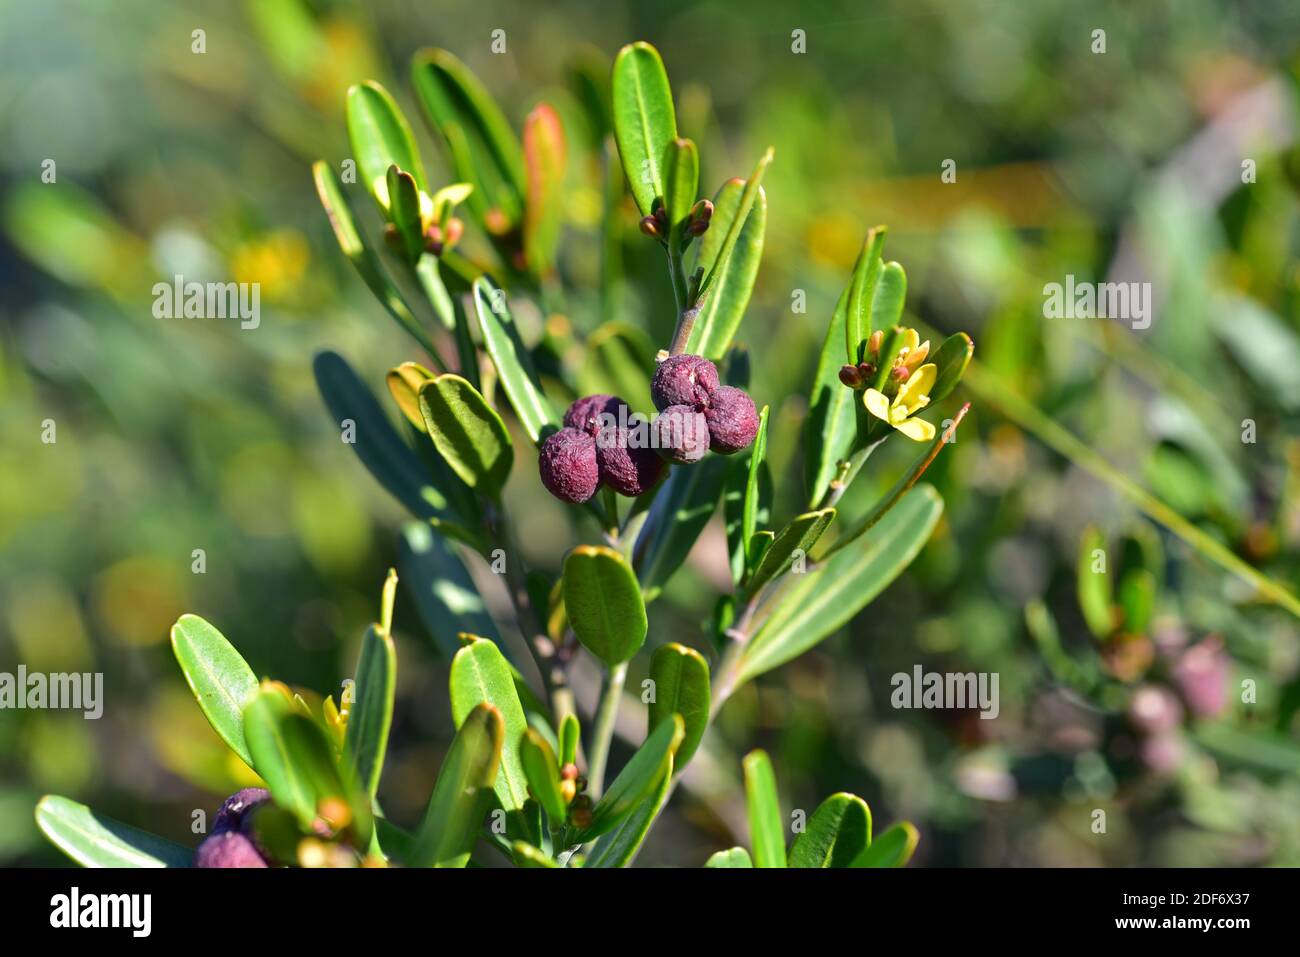 Spurge olive (Cneorum tricoccon or Cneorum tricoccum) is an evergreen shrub native to western Mediterranean Basin. Flowers and fruits detail. Stock Photo